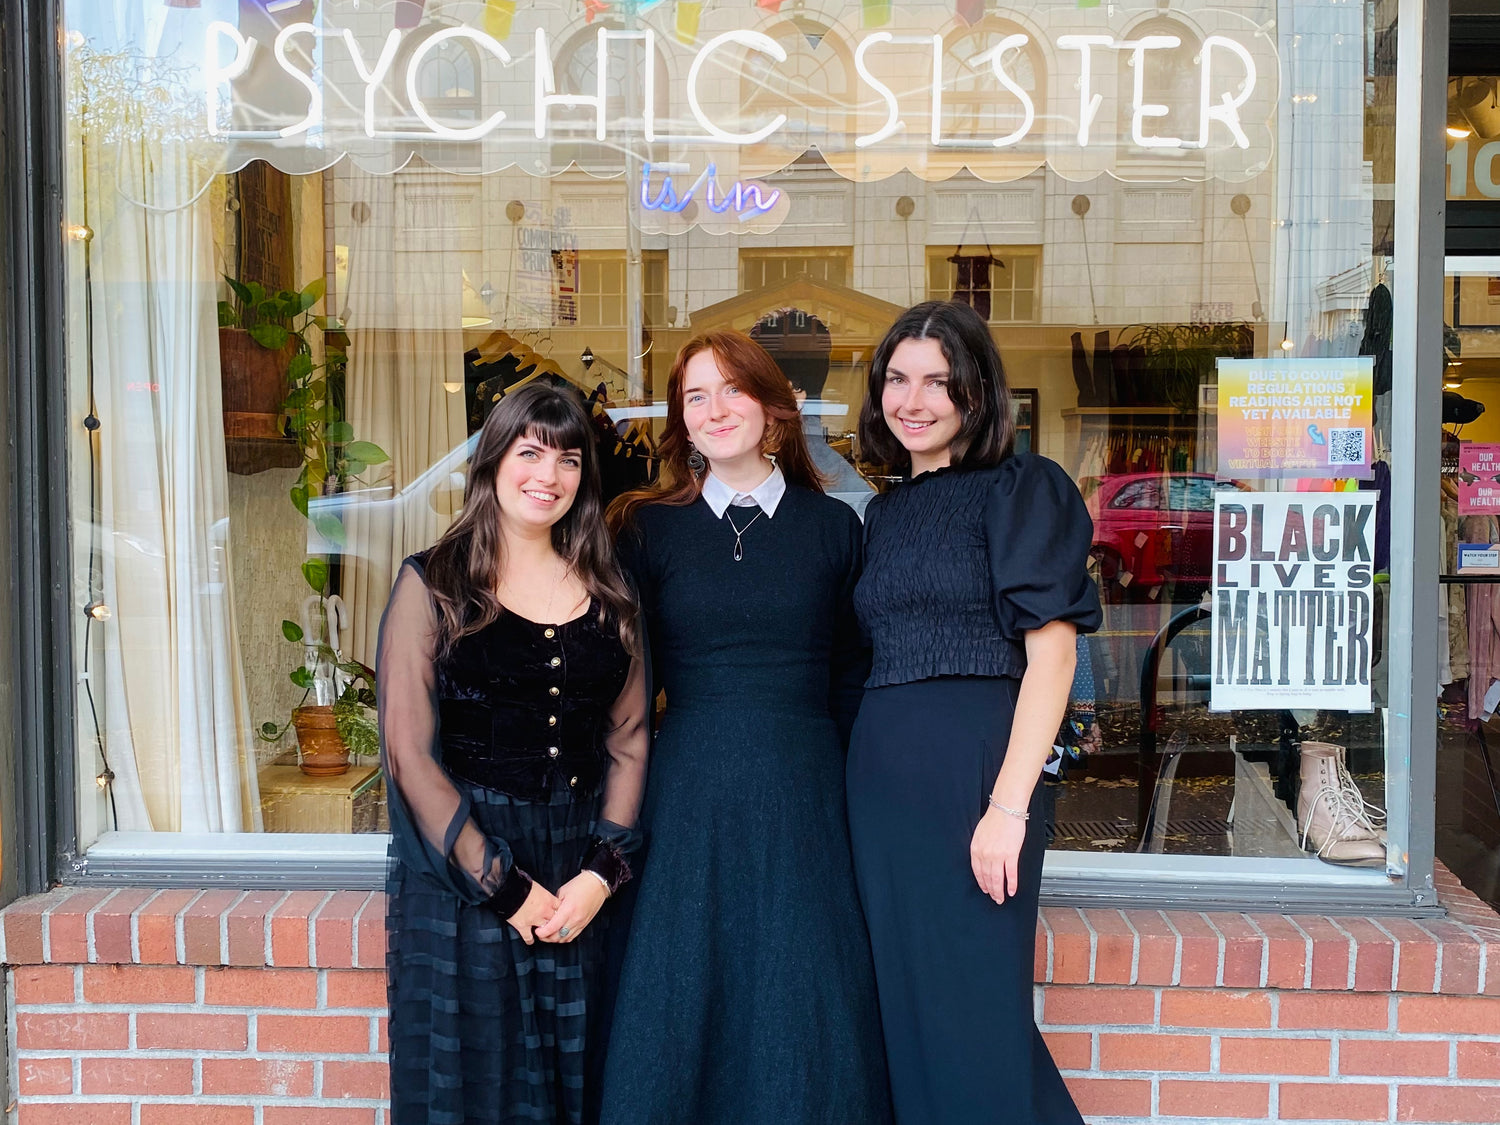 Three employees standing in front of the Psychic Sister shop window.